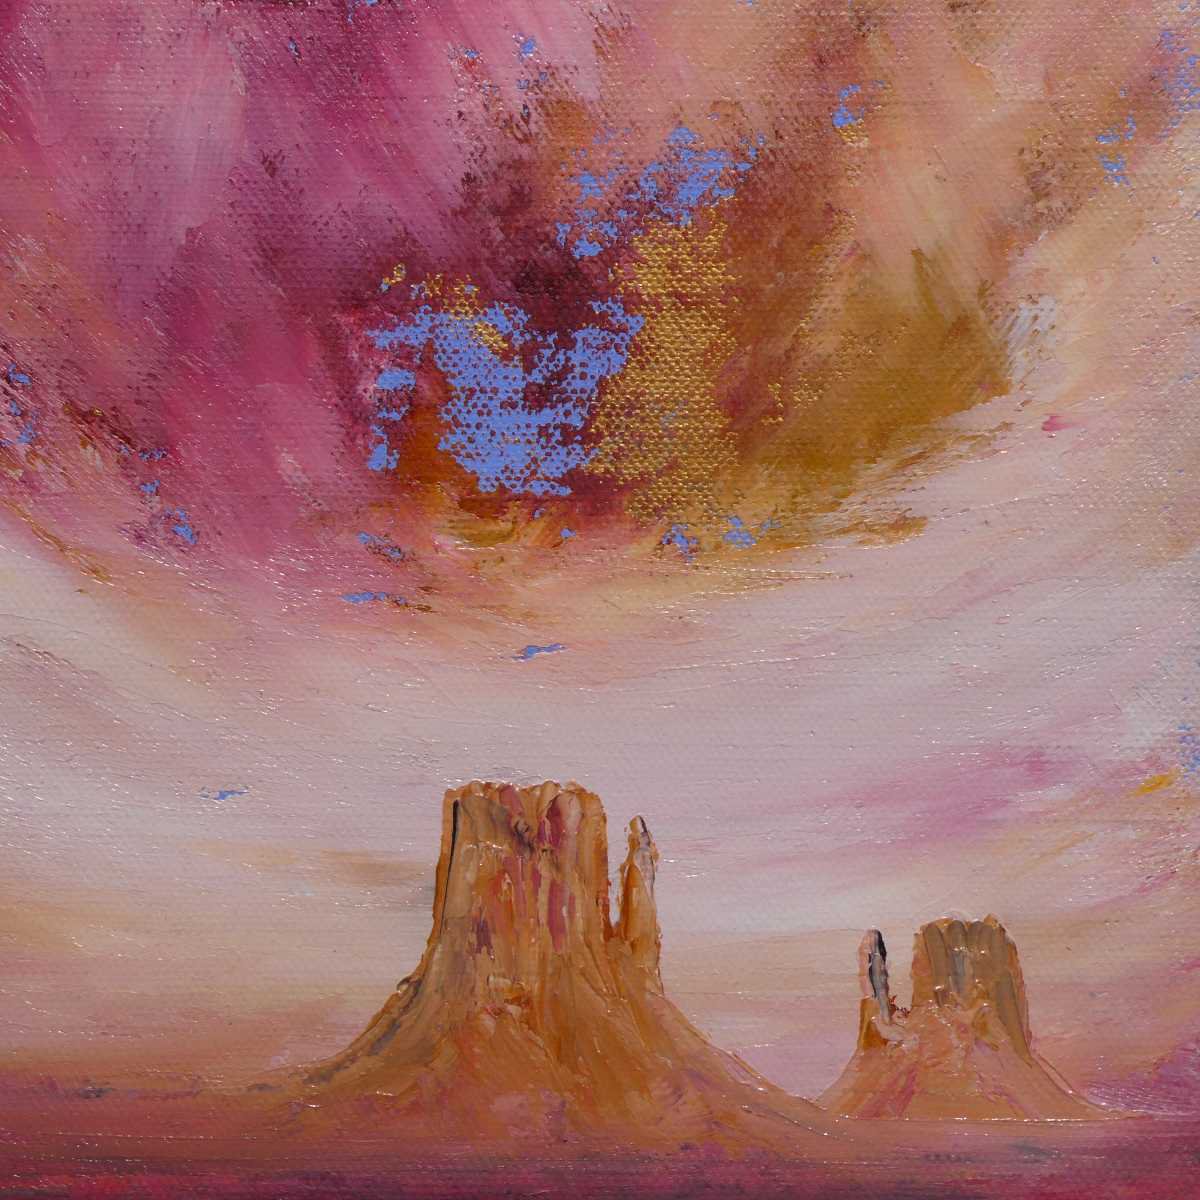 The Mittens, Monument Valley National Park by oconnart